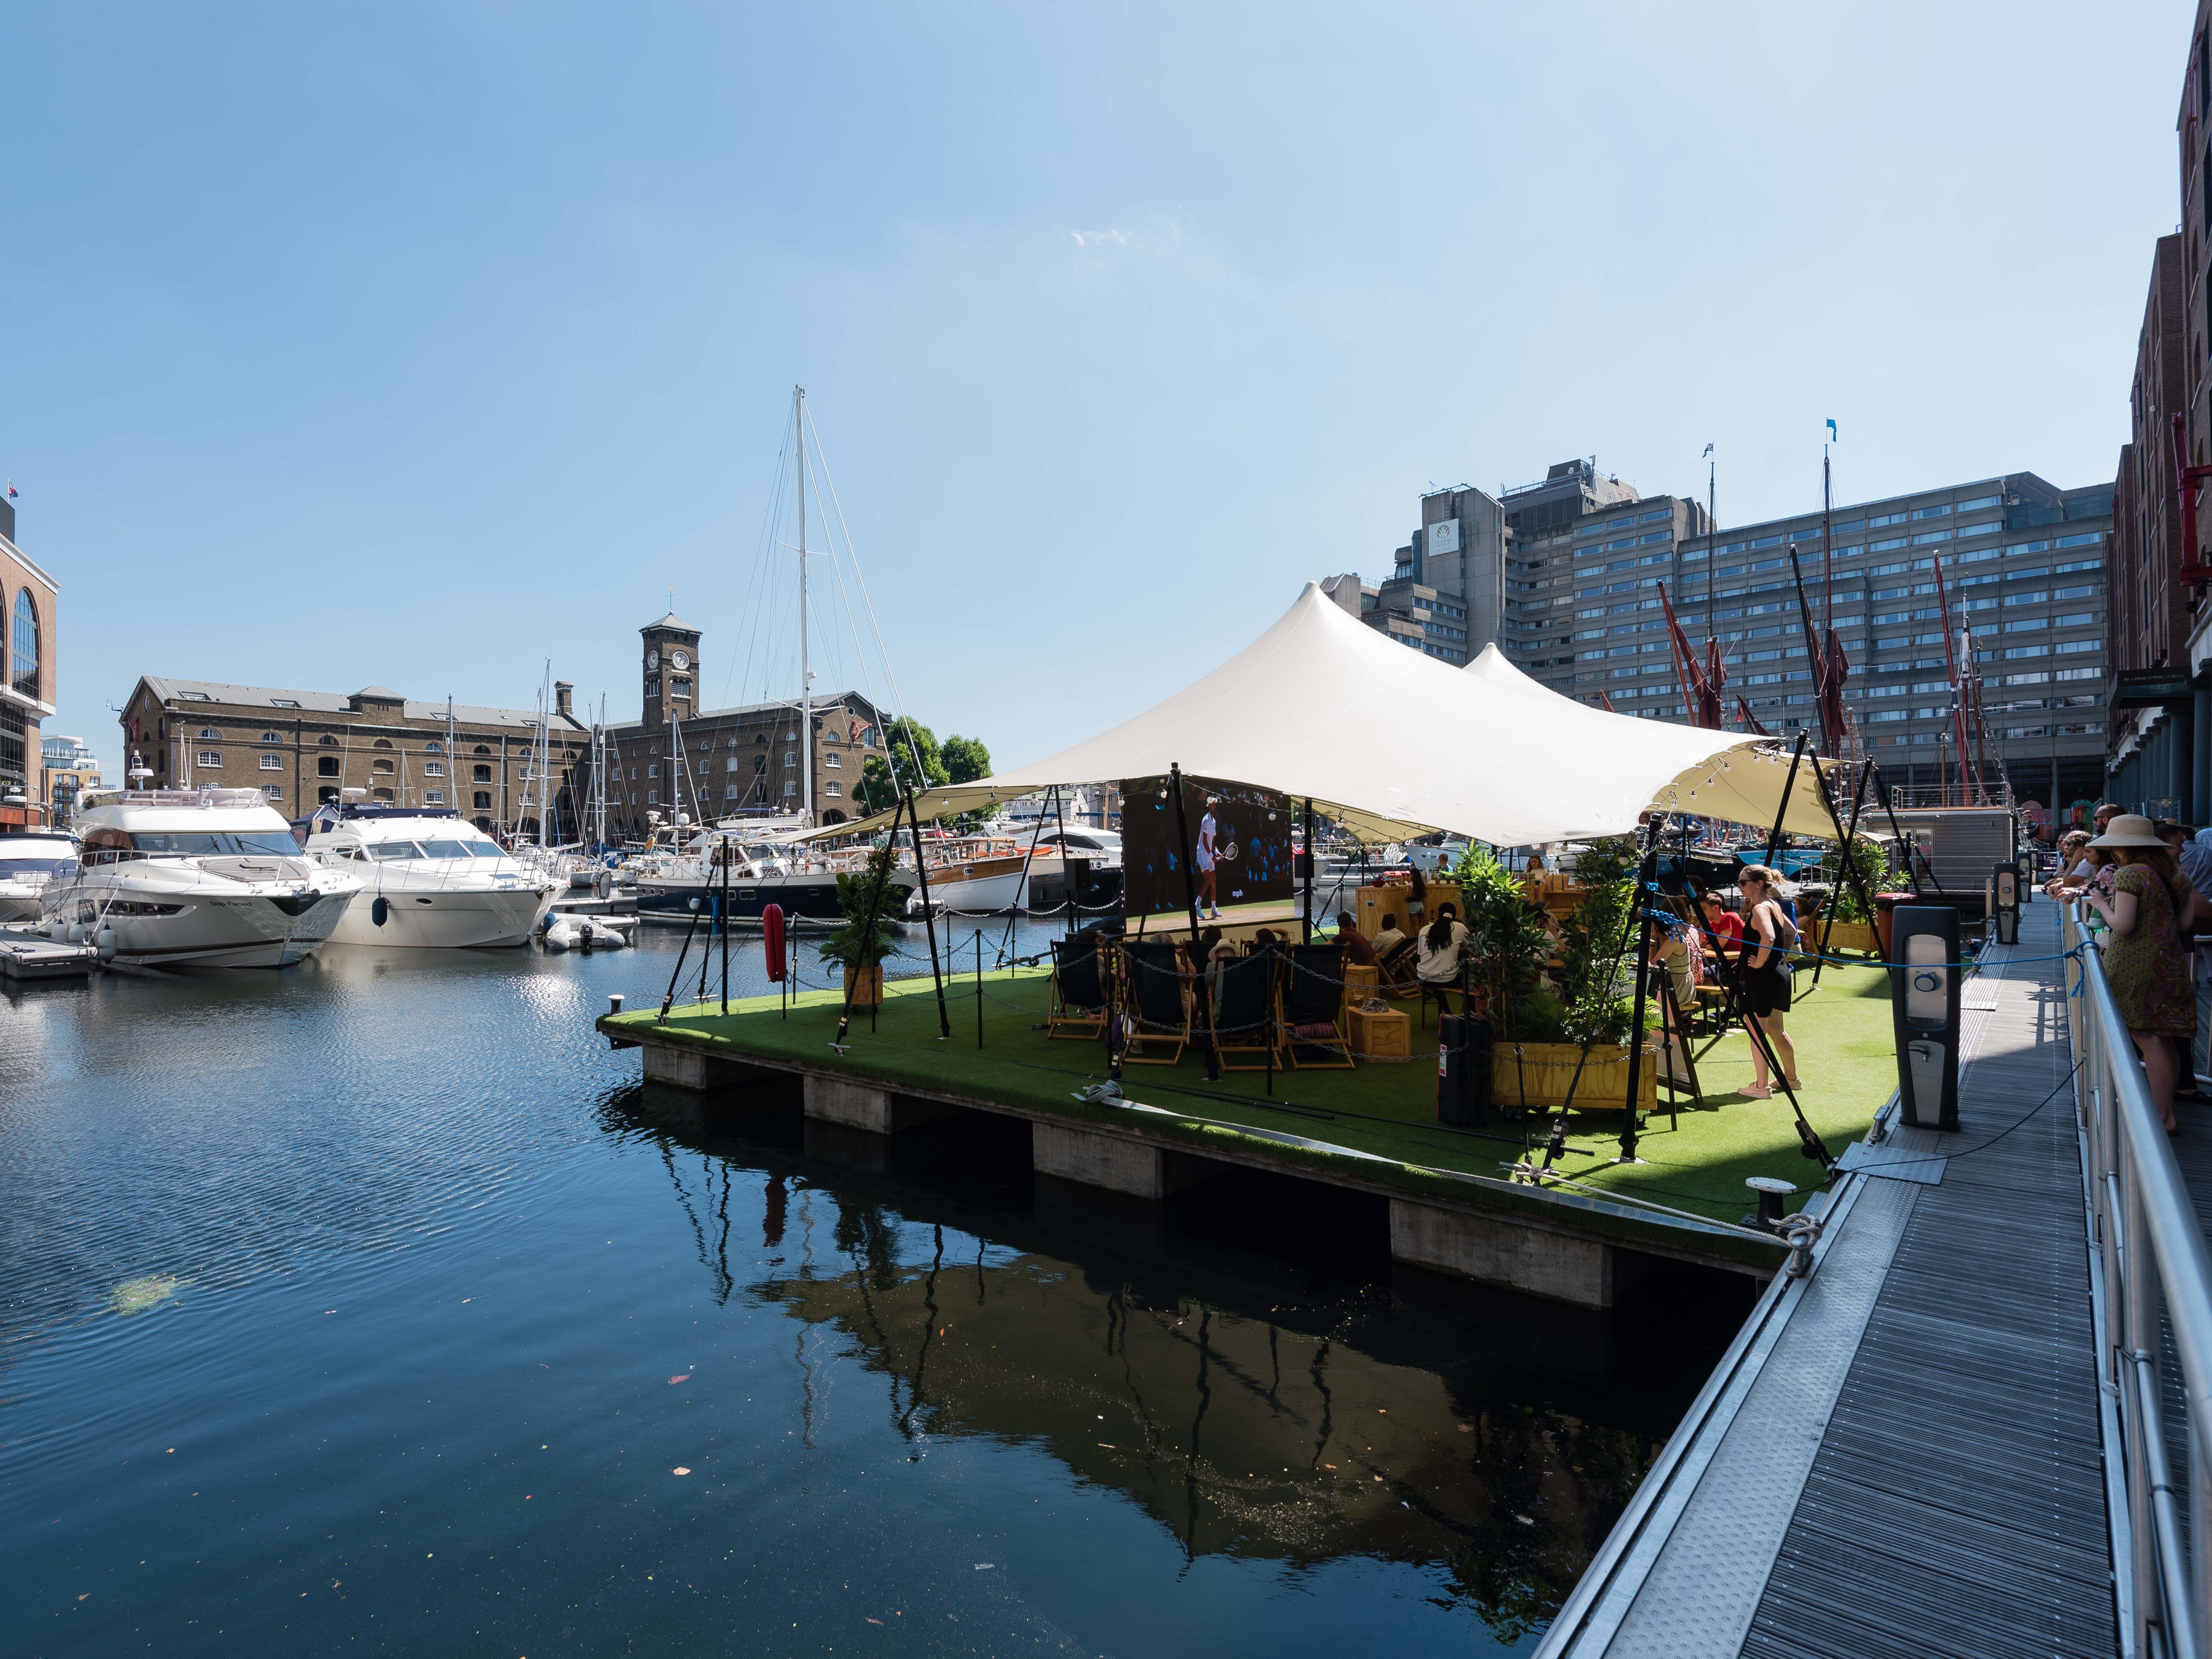 Revel in the rallies at St Katherine Docks